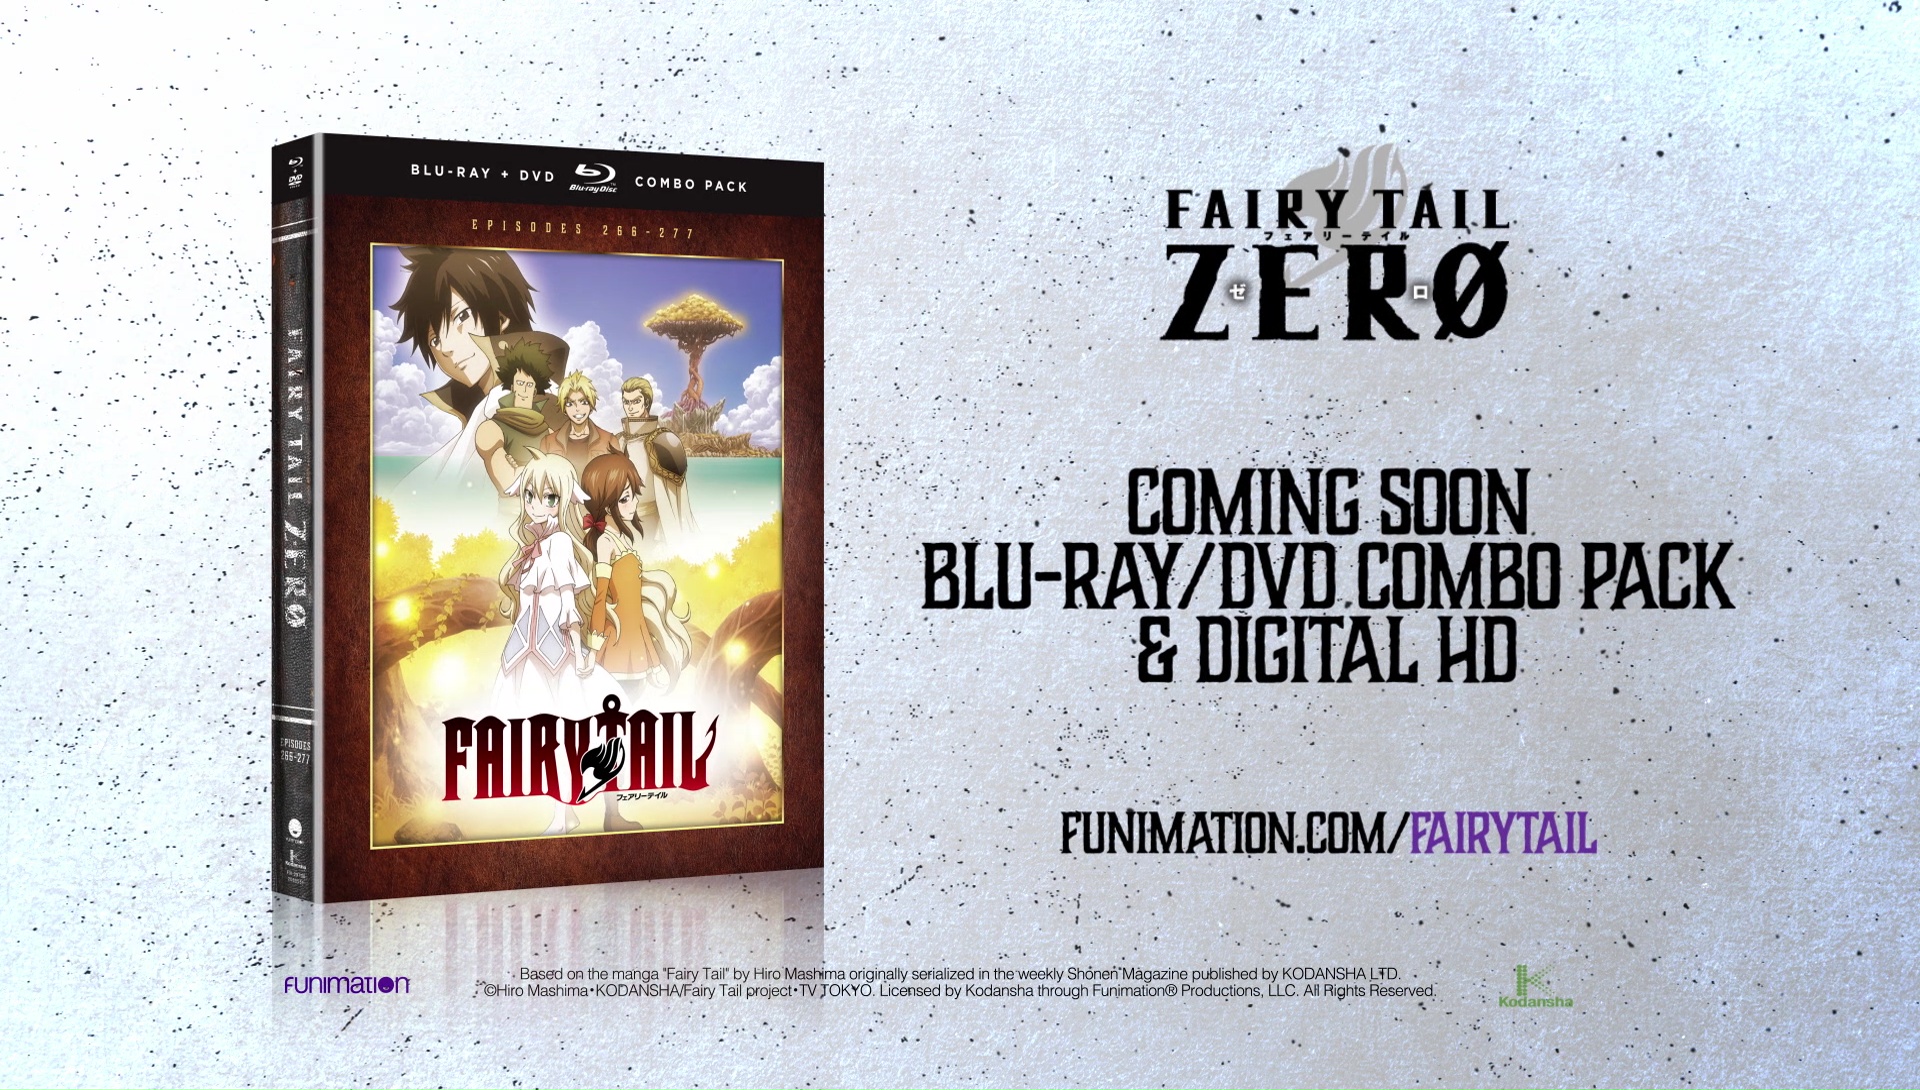 courtney mangan recommends fairy tail episodes funimation pic